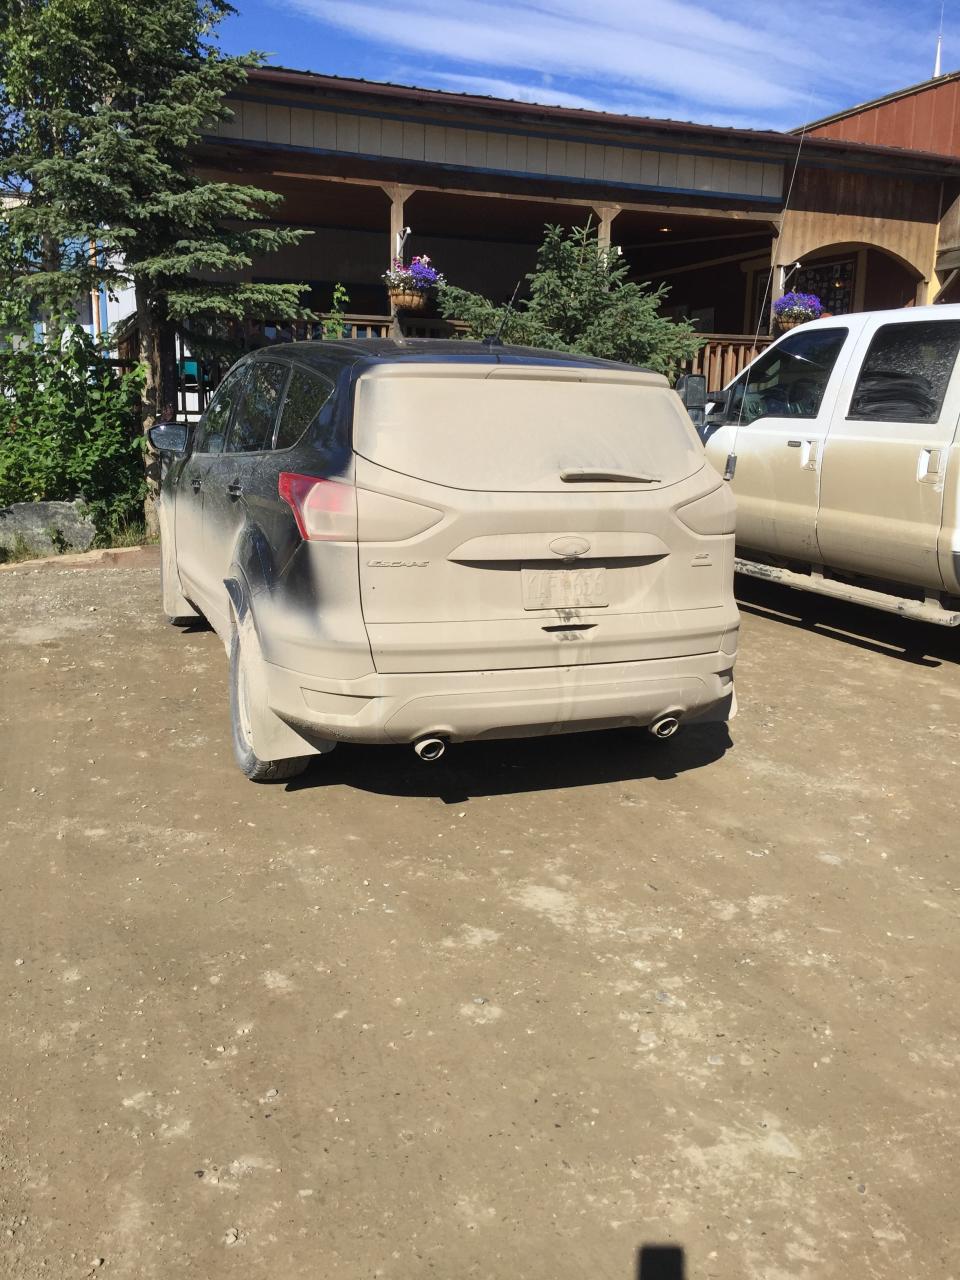 This is what a car that's been on the unpaved Dalton Highway looks like. (Photo: Photo by Ann Brenoff)